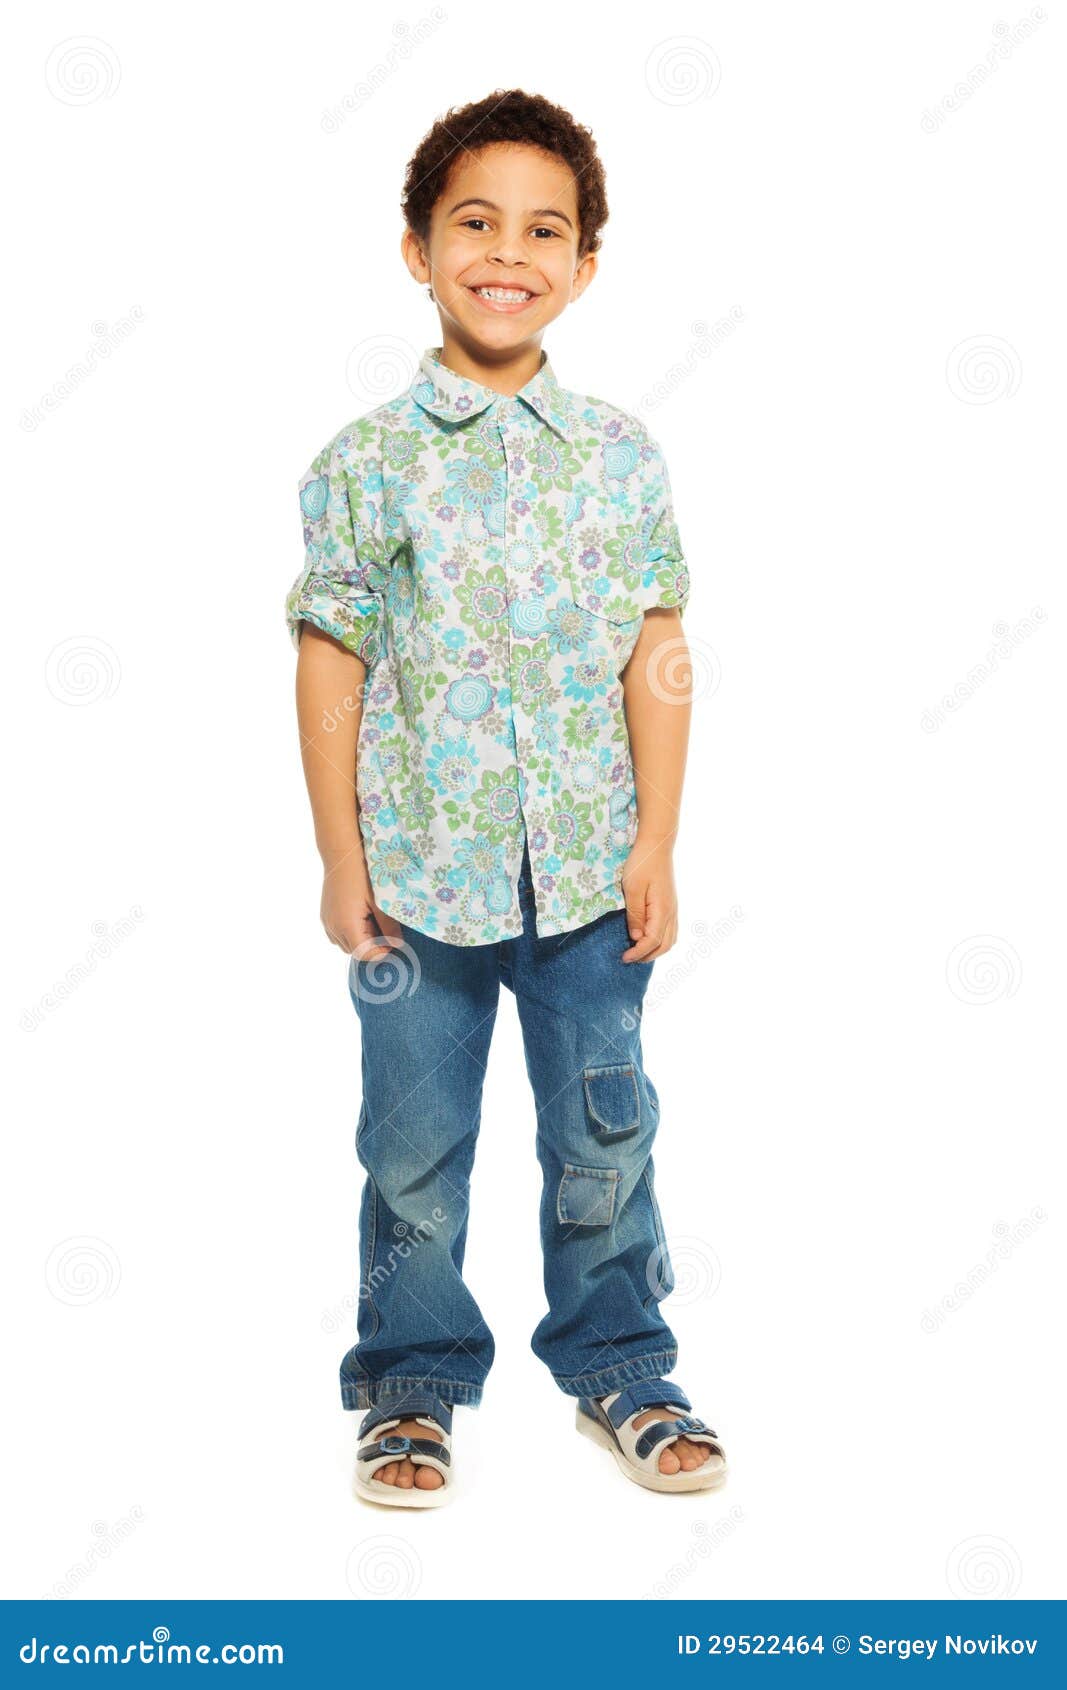 Super Cute Happy 5 Years Old Boy Stock Photo - Image of male, boys: 29522464